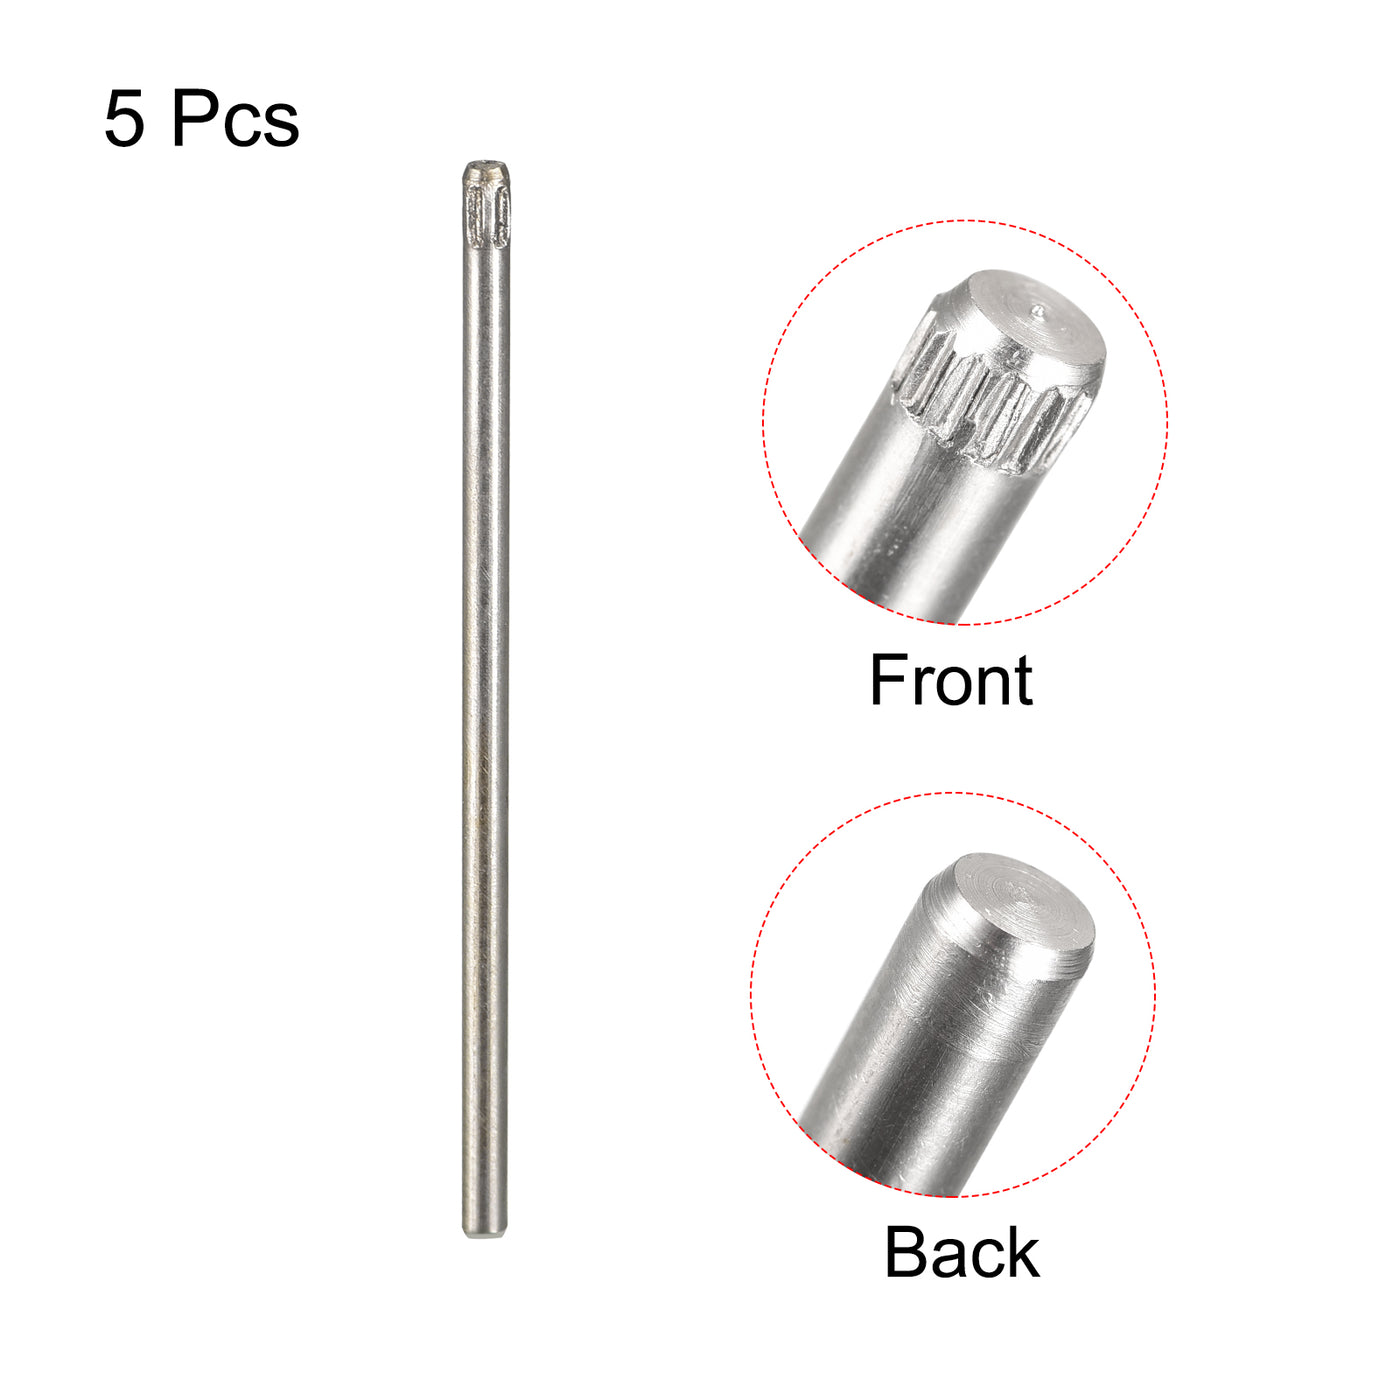 uxcell Uxcell 1.5x35mm 304 Stainless Steel Dowel Pins, 5Pcs Knurled Head Flat End Dowel Pin